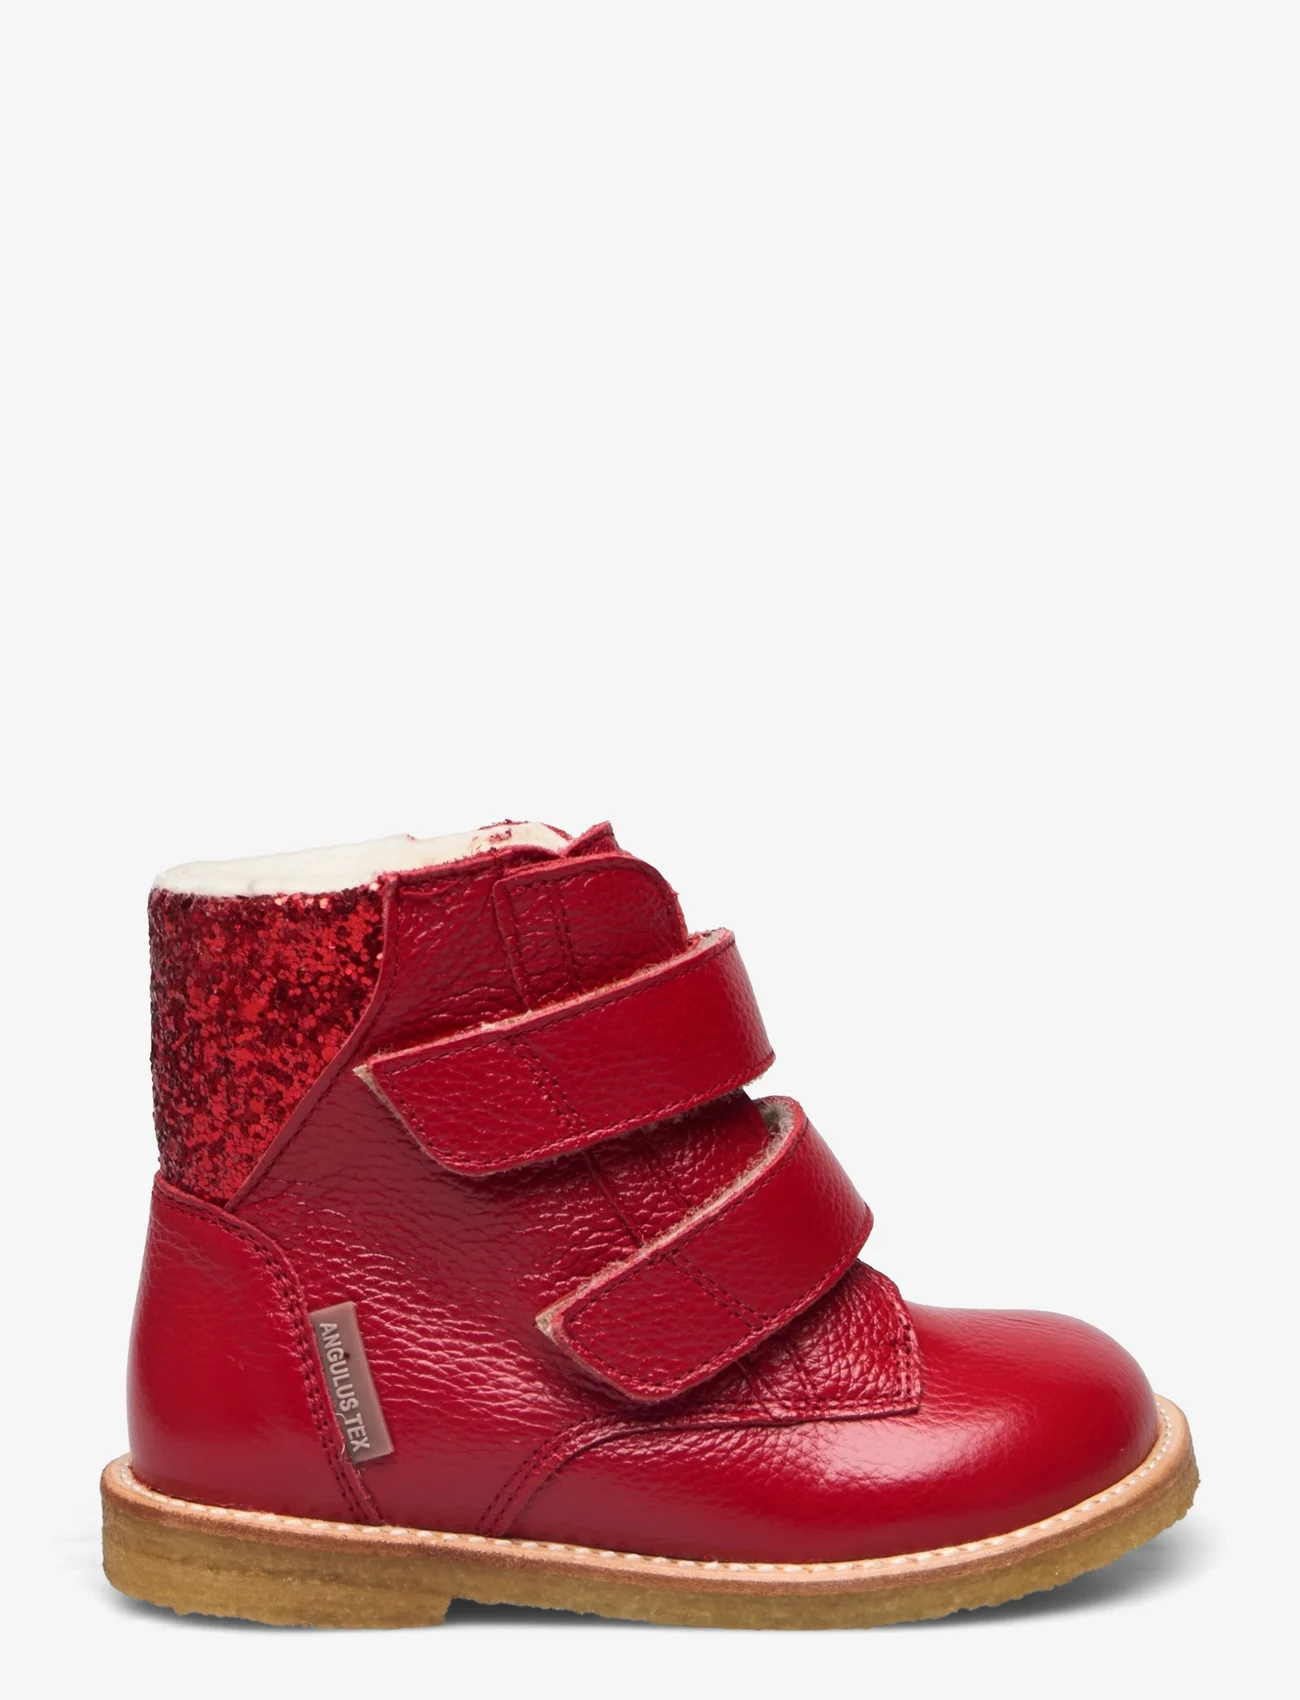 ANGULUS - Boots - flat - with velcro - vaikams - 2568/1711 red/red glitter - 1